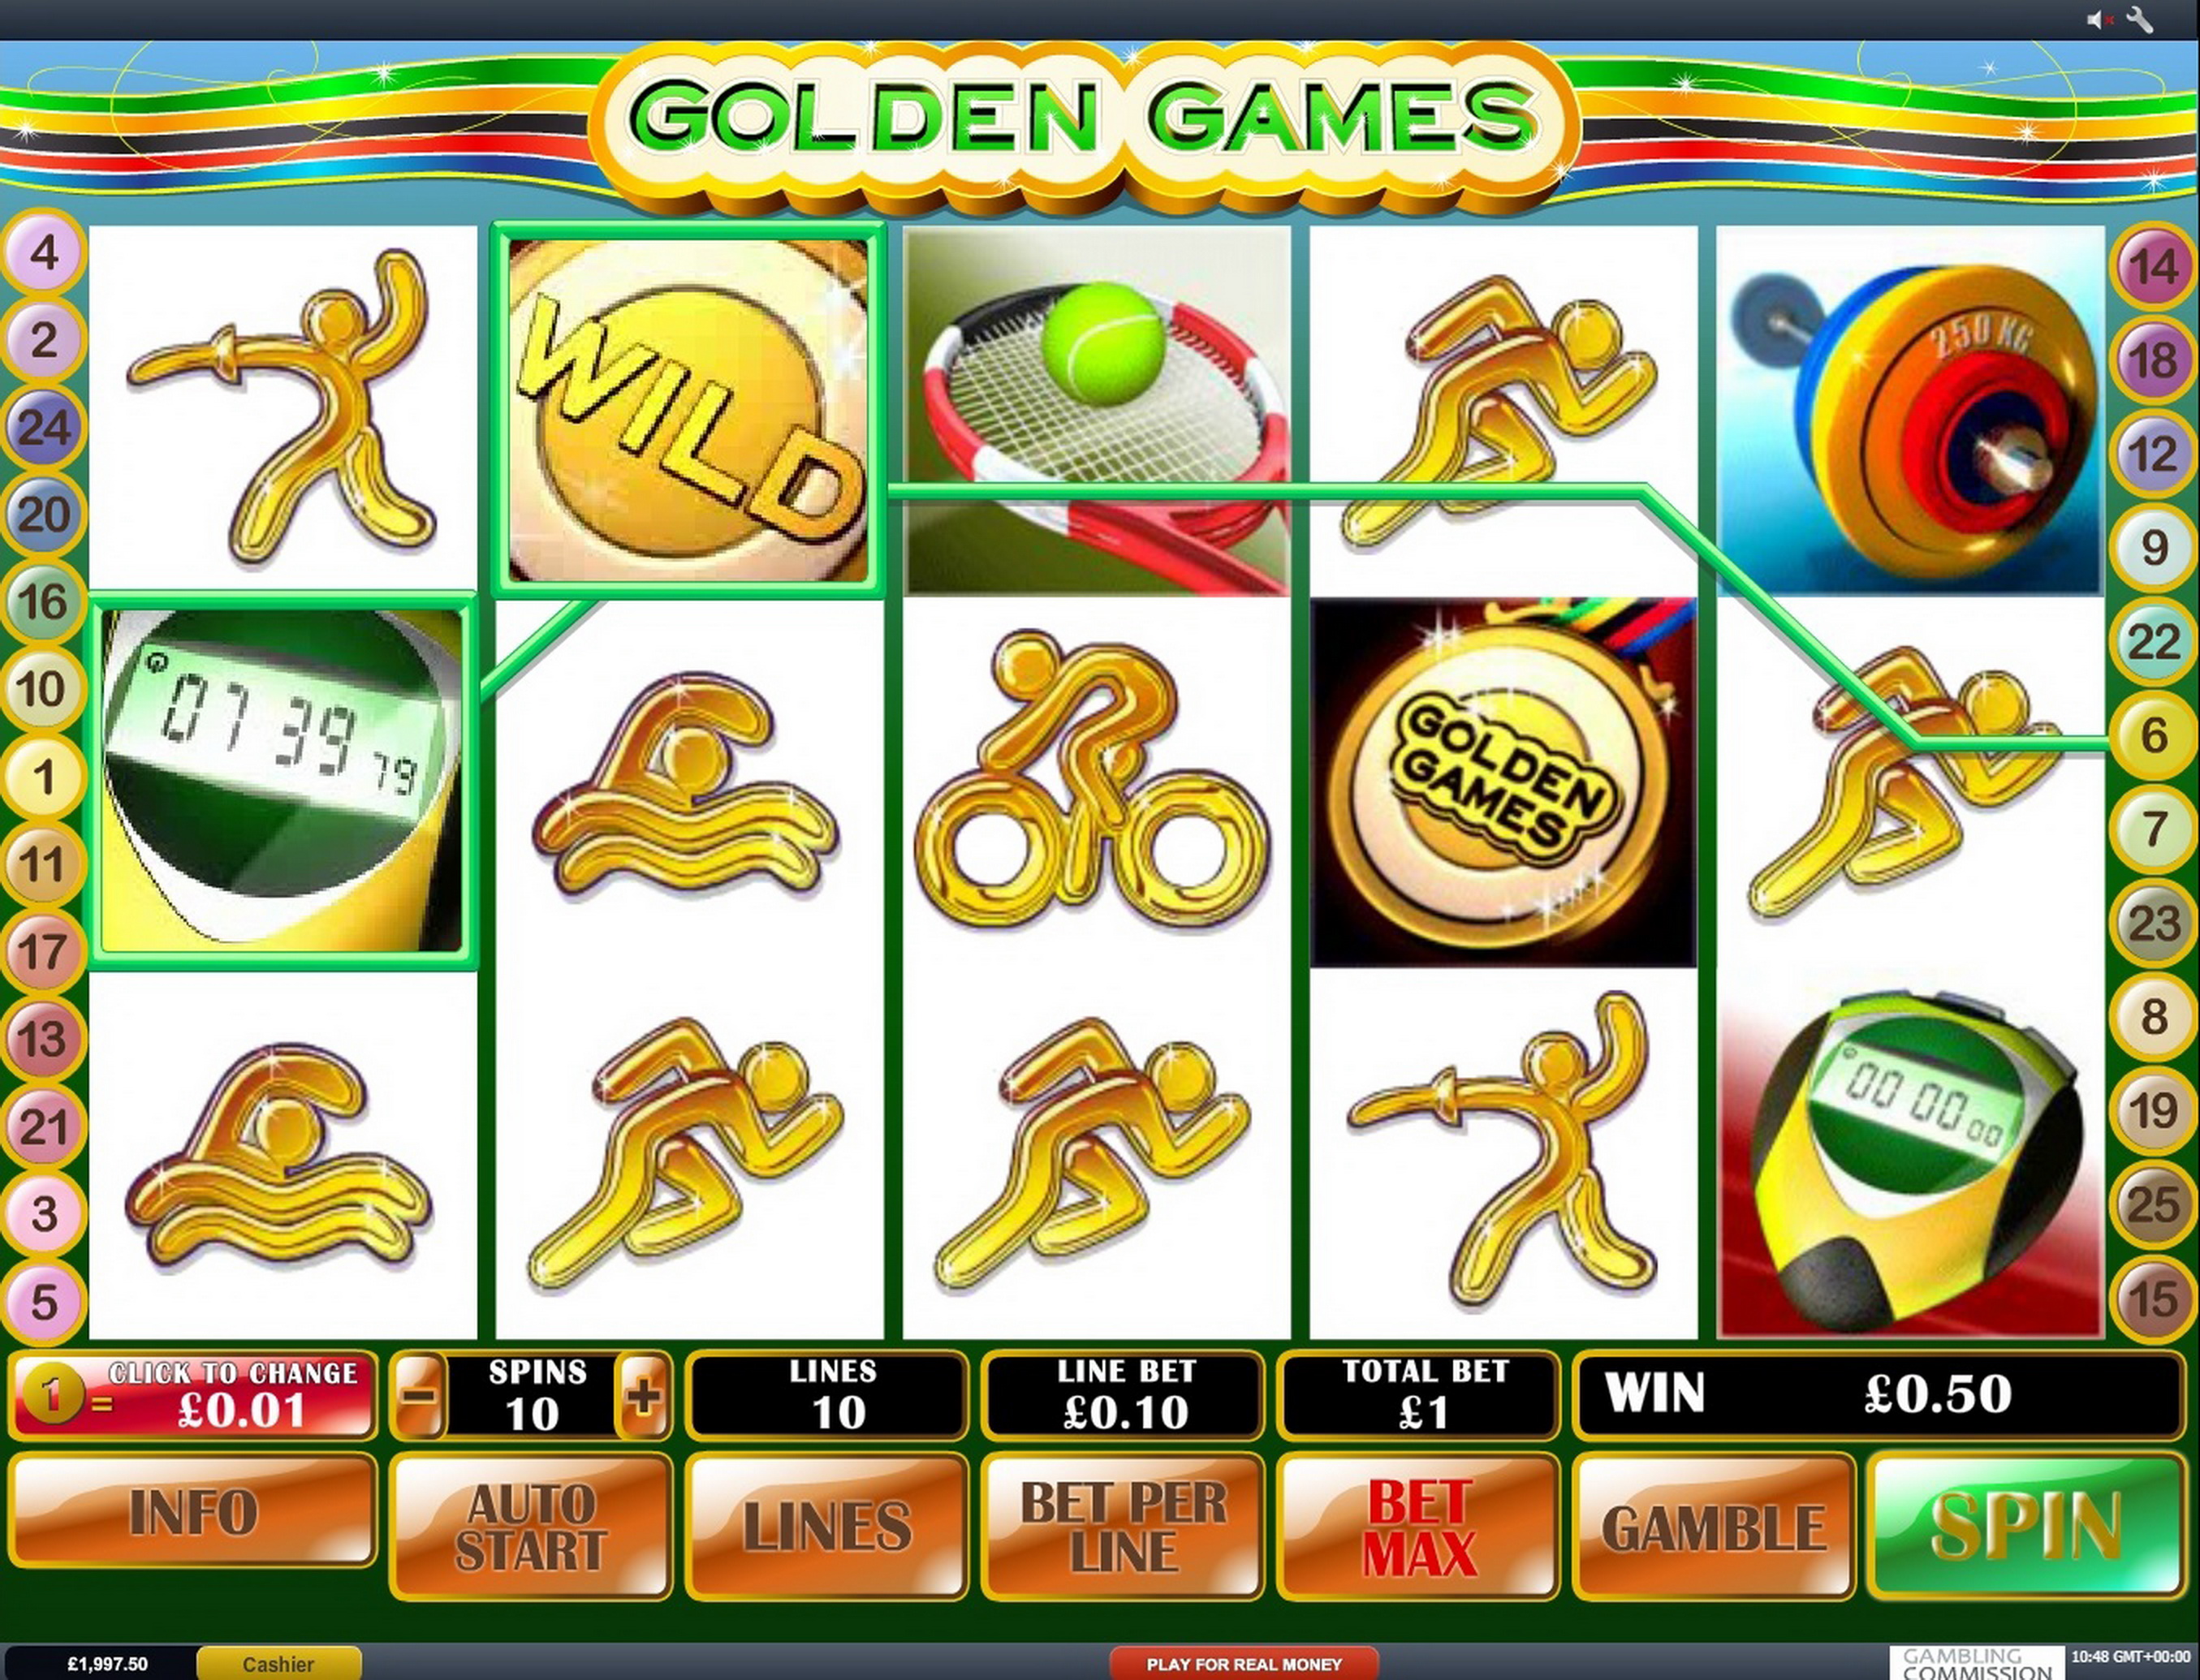 Win Money in Golden Games Free Slot Game by Playtech